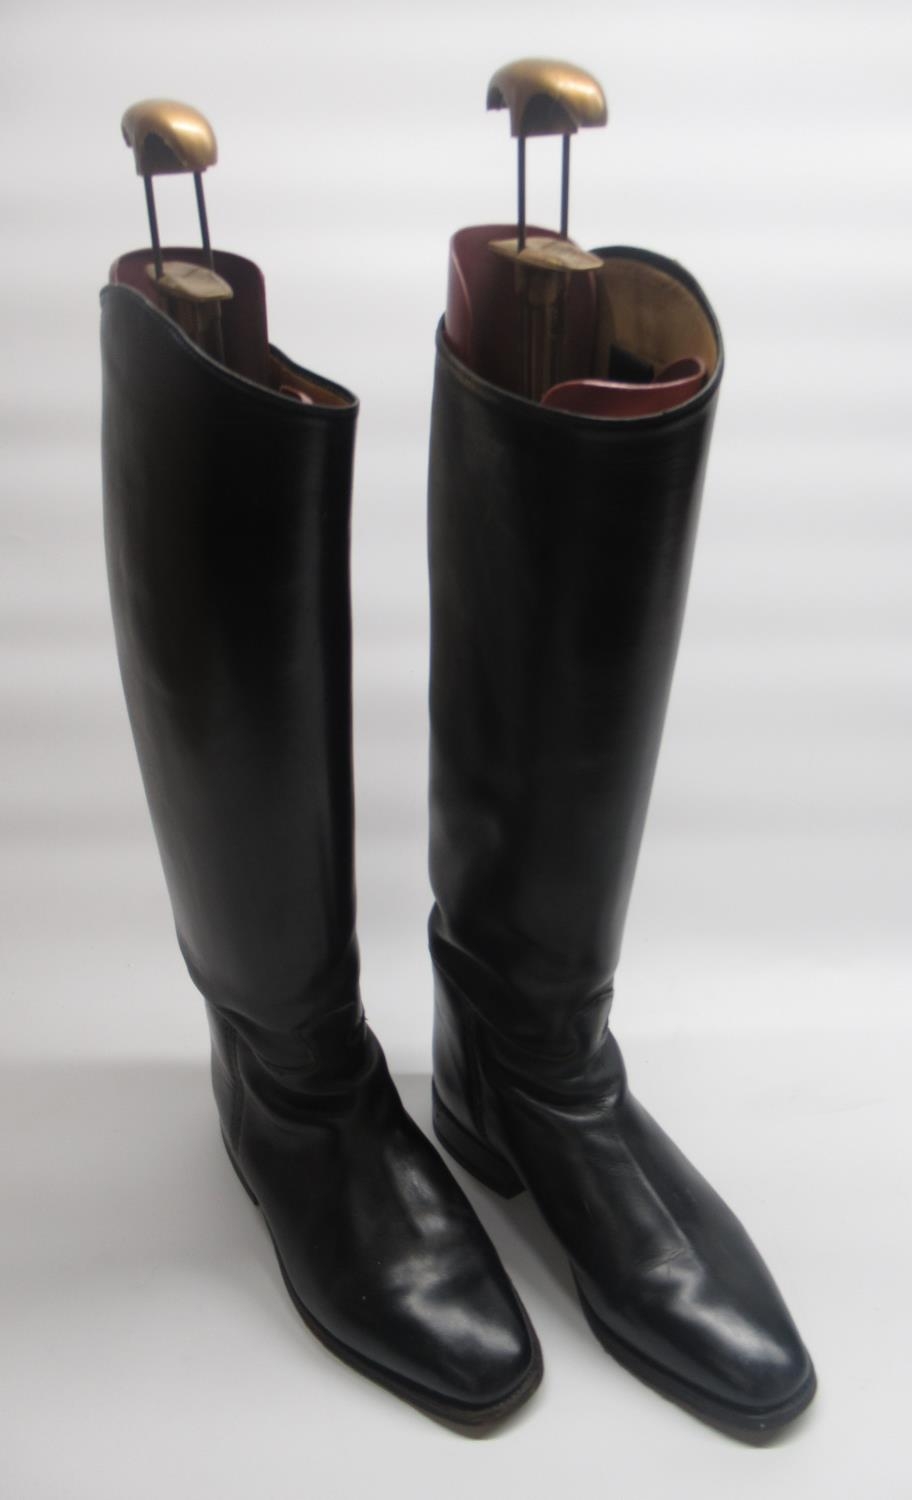 Pair of leather riding boots, size 6 1/2